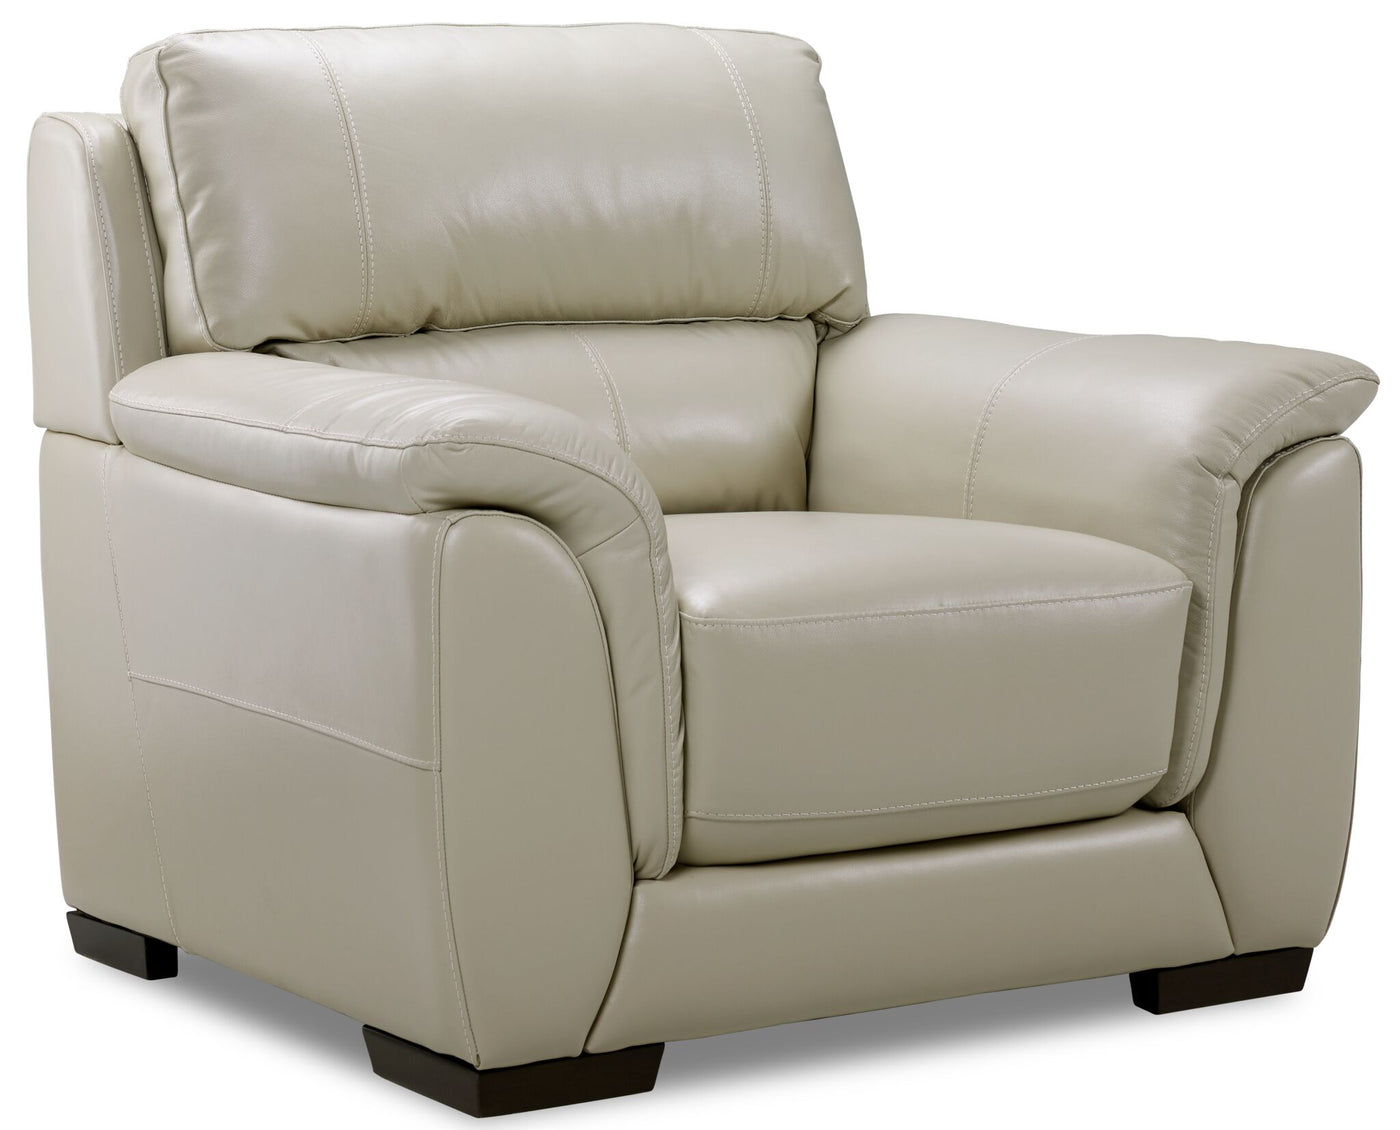 Avalon Leather Sofa and Chair Set - Oyster Grey Cream